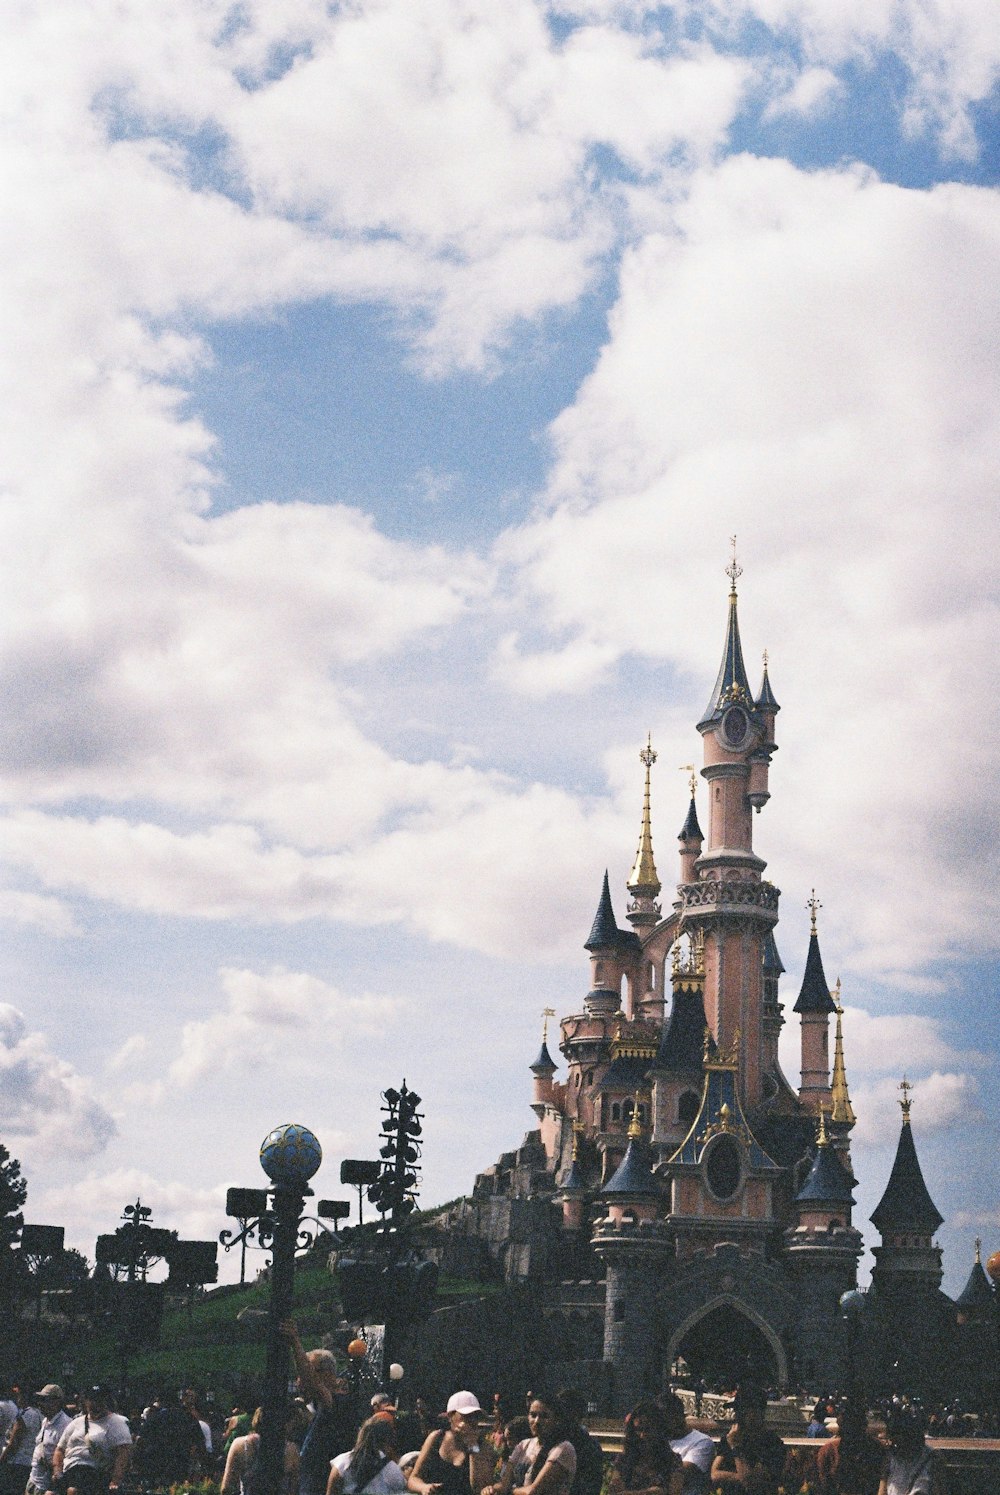 pink and blue Disneyland castle under white and blue cloudy sky